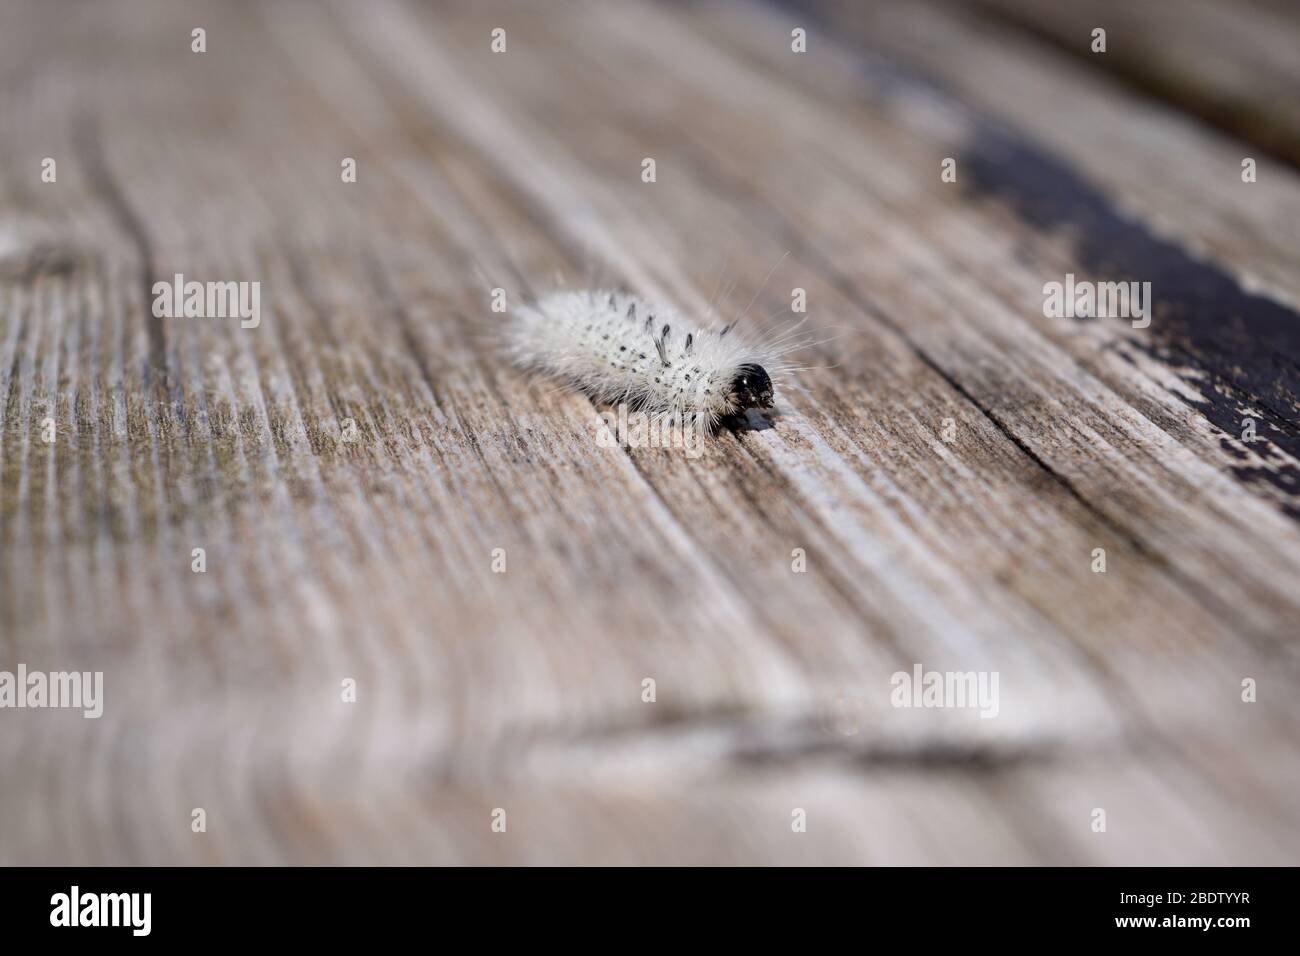 Fuzzy white hickory tussock moth caterpillar. Insect that can cause allergic skin reactions, rash, itching and swelling. Stock Photo